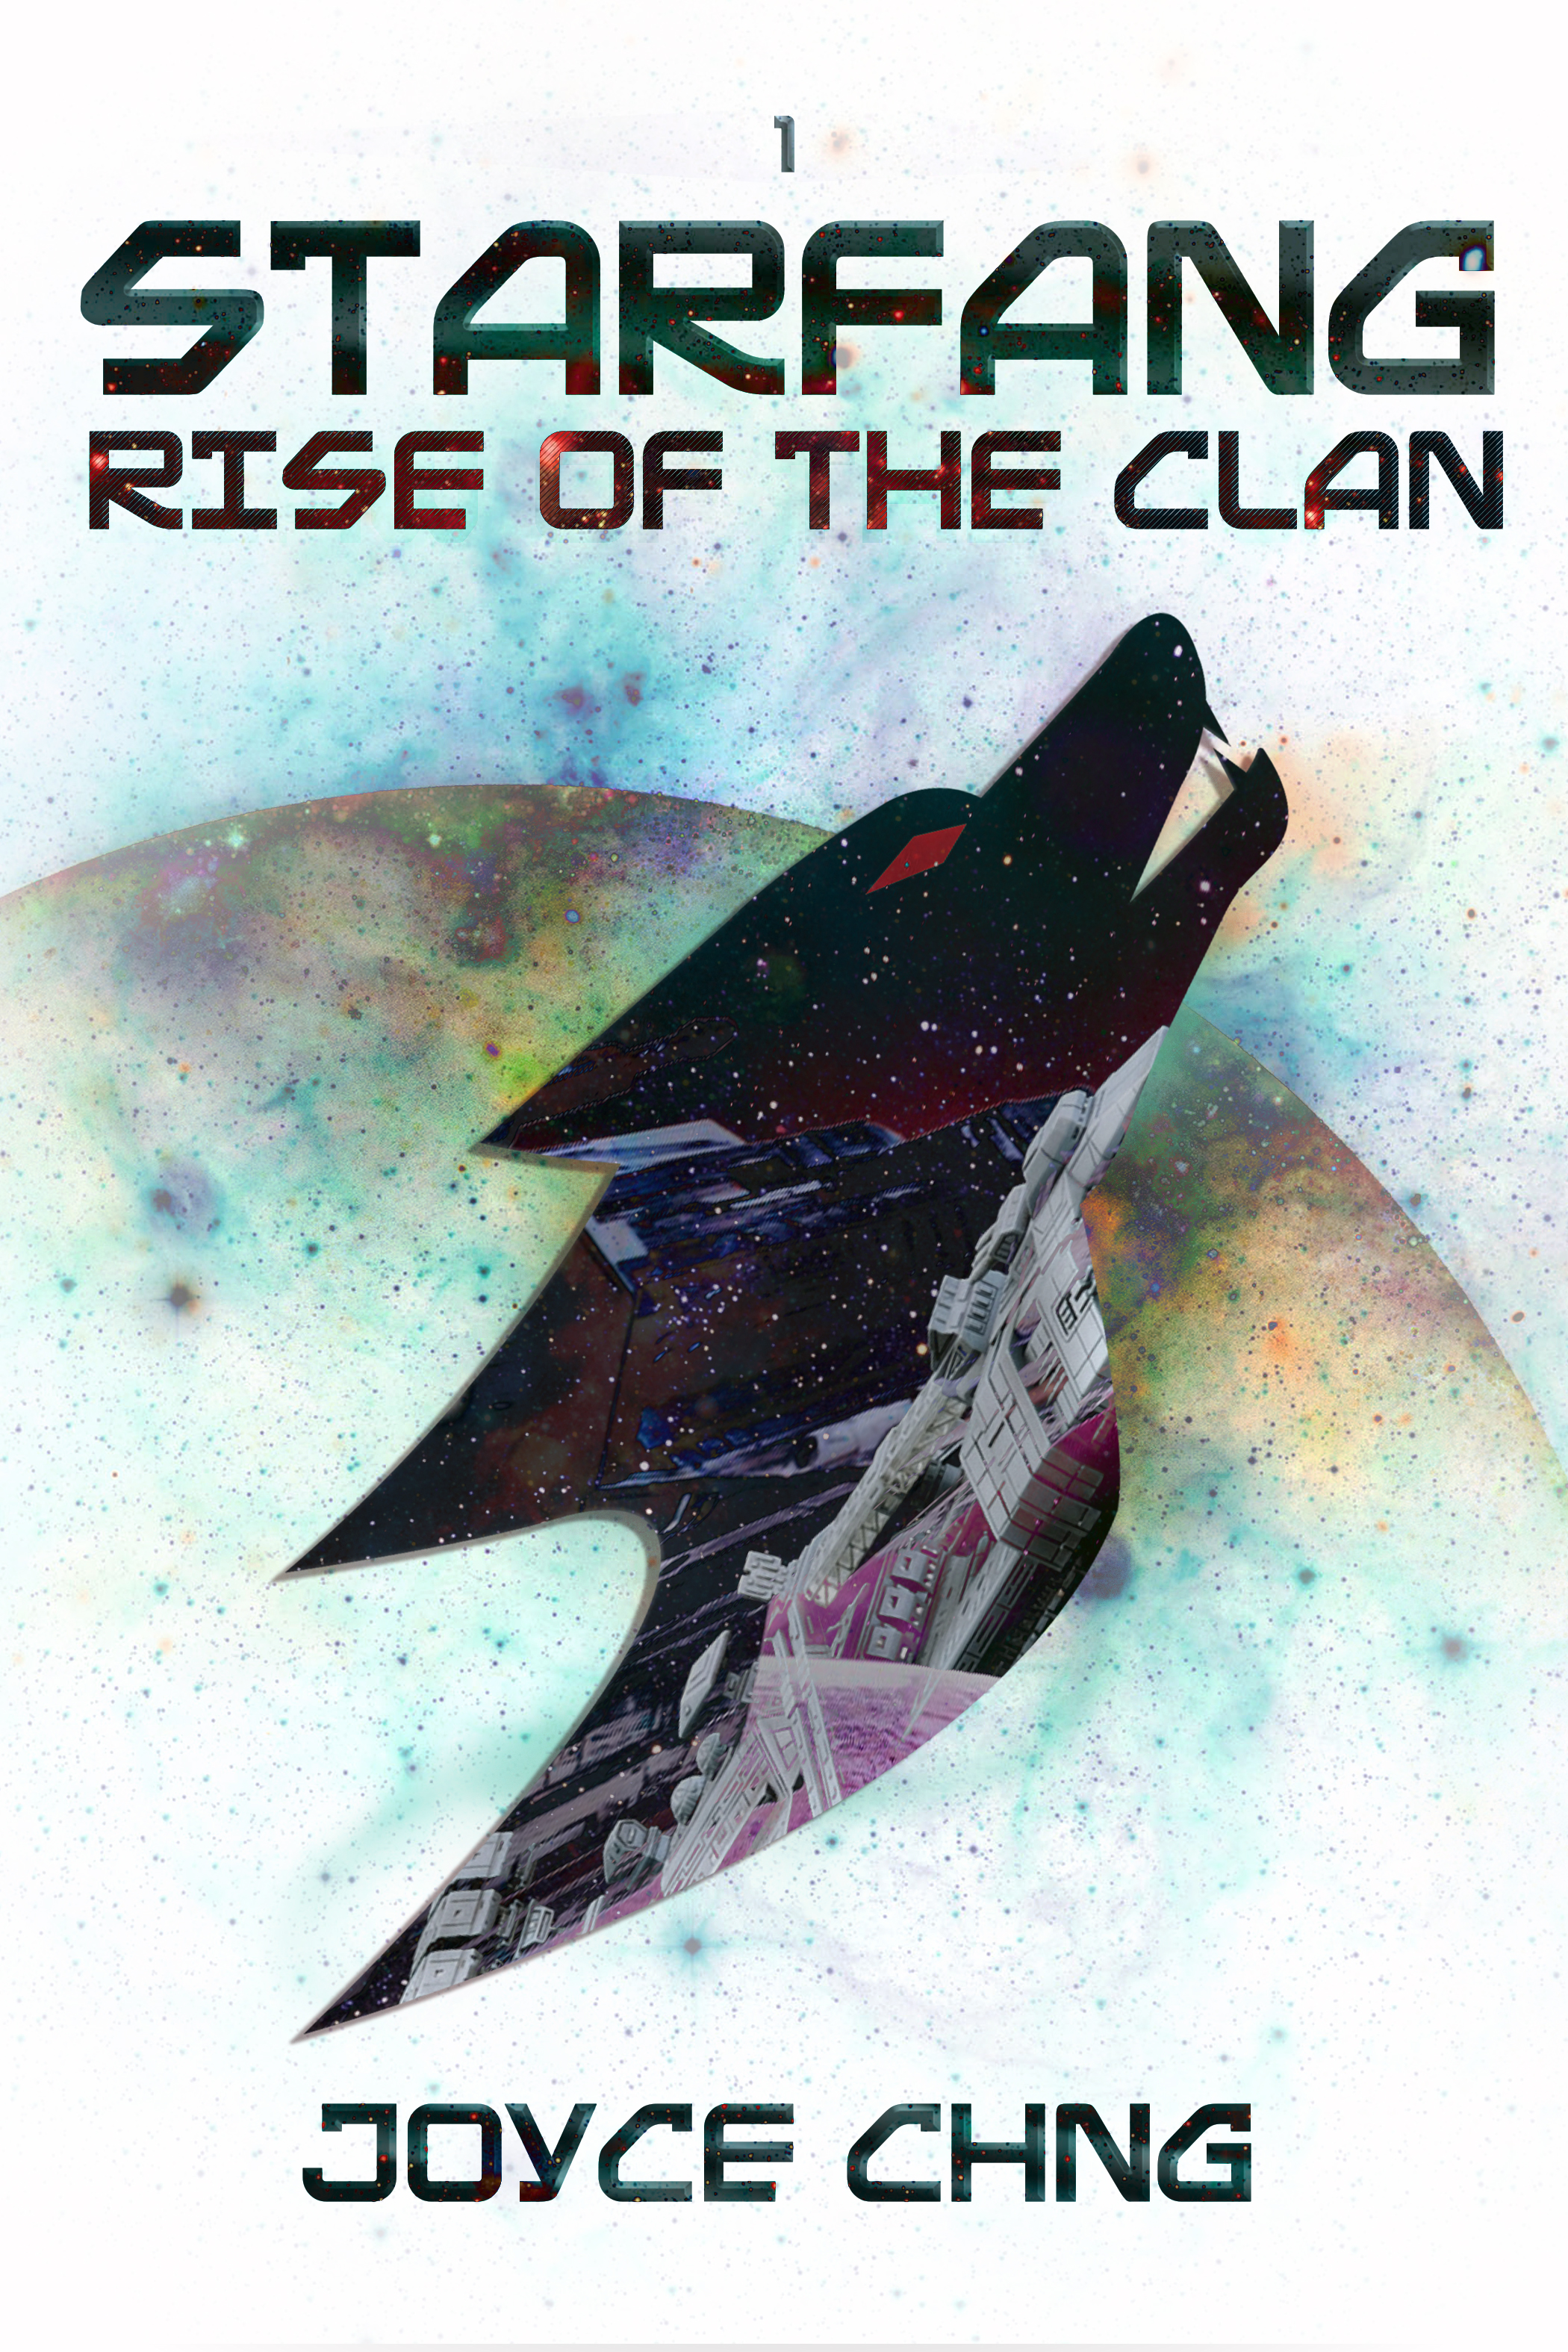 Starfang Rise of the Clan by Joyce Chng